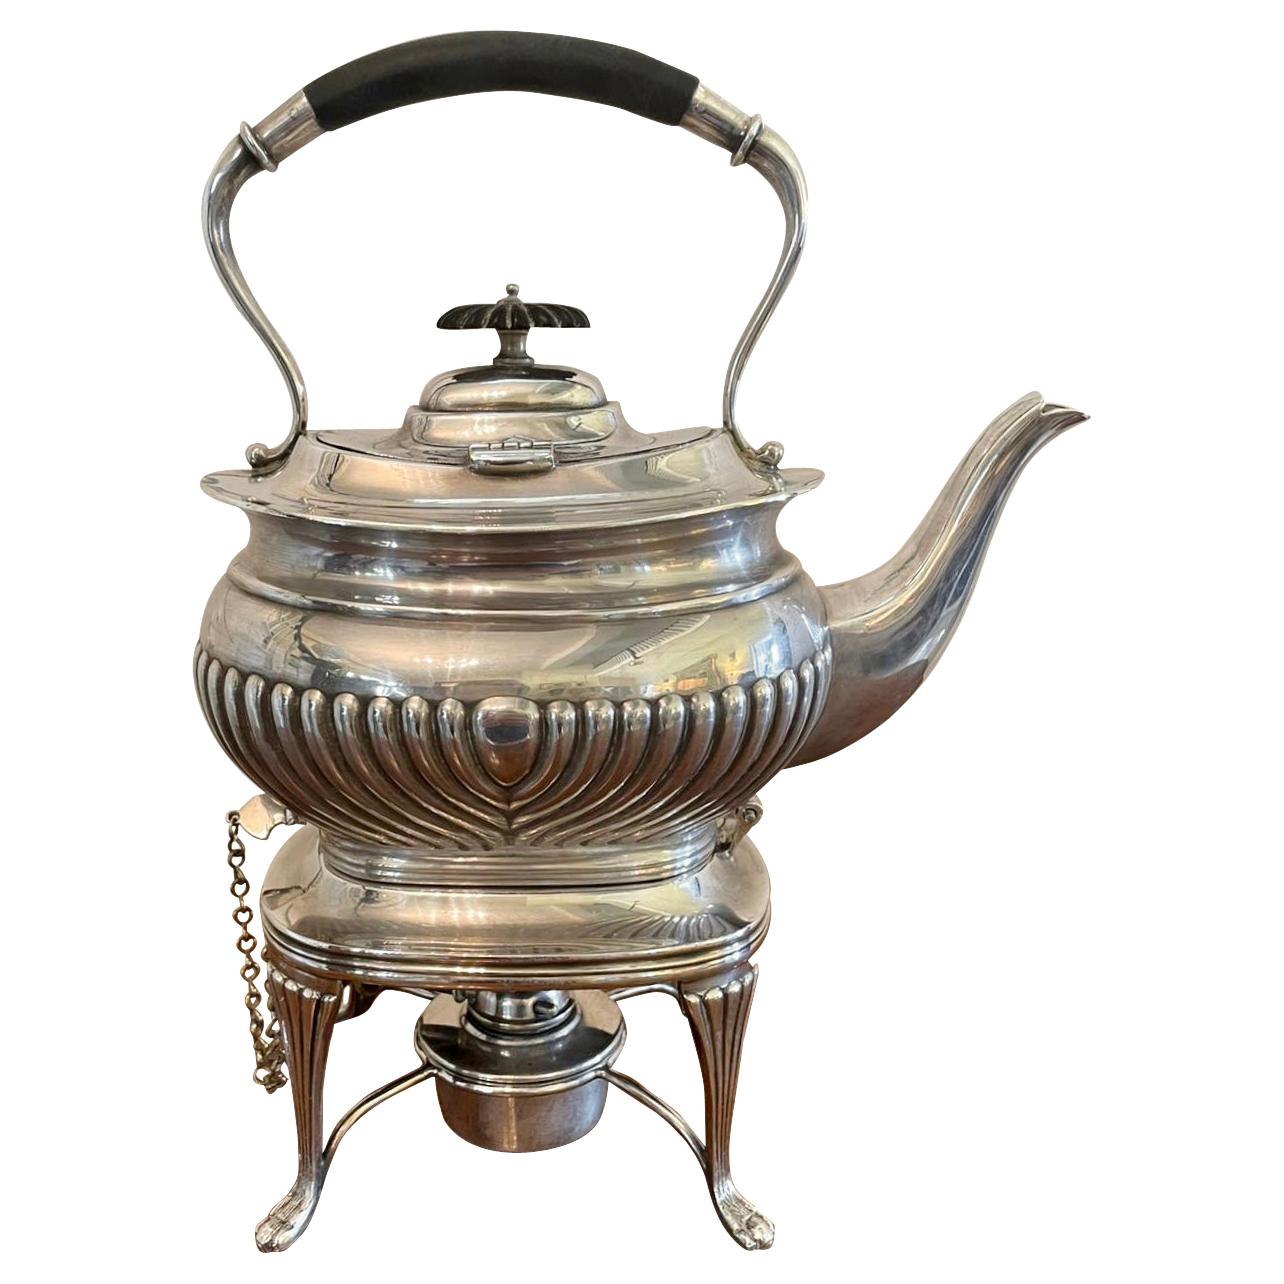 Antique Edwardian Silver Plated Spirit Kettle on Stand